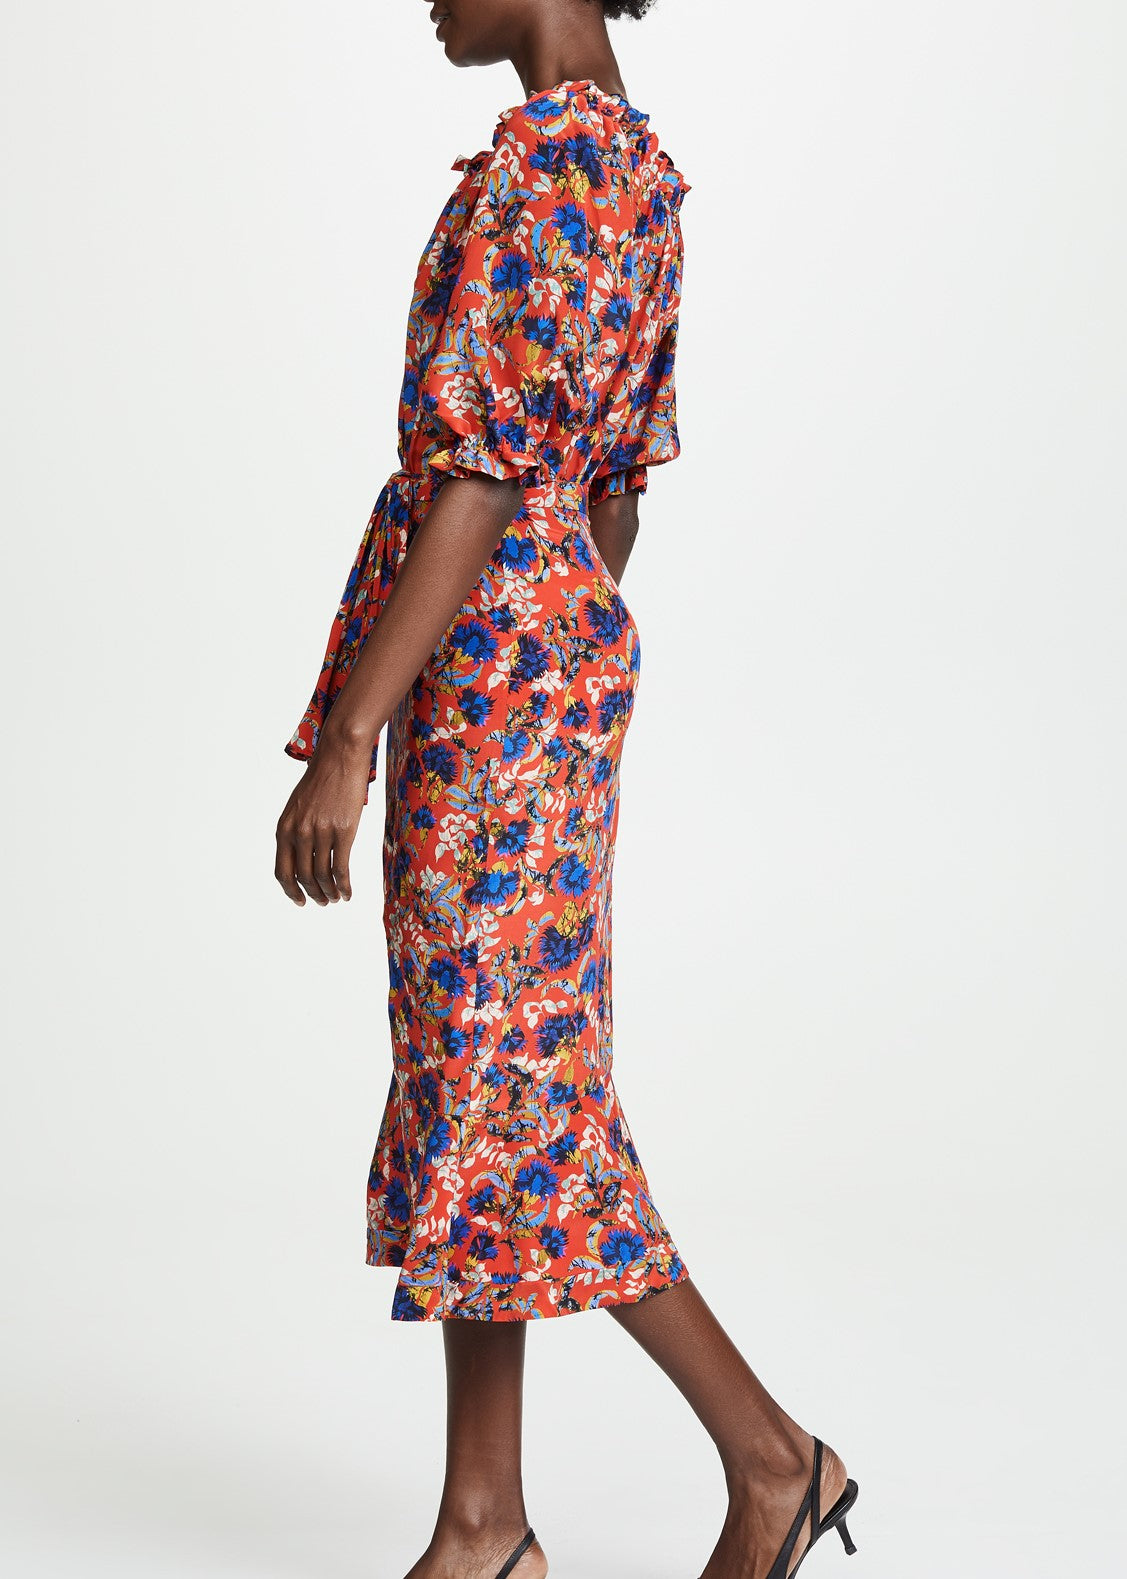 Just In - Women's New Arrivals – Elizabeth Charles